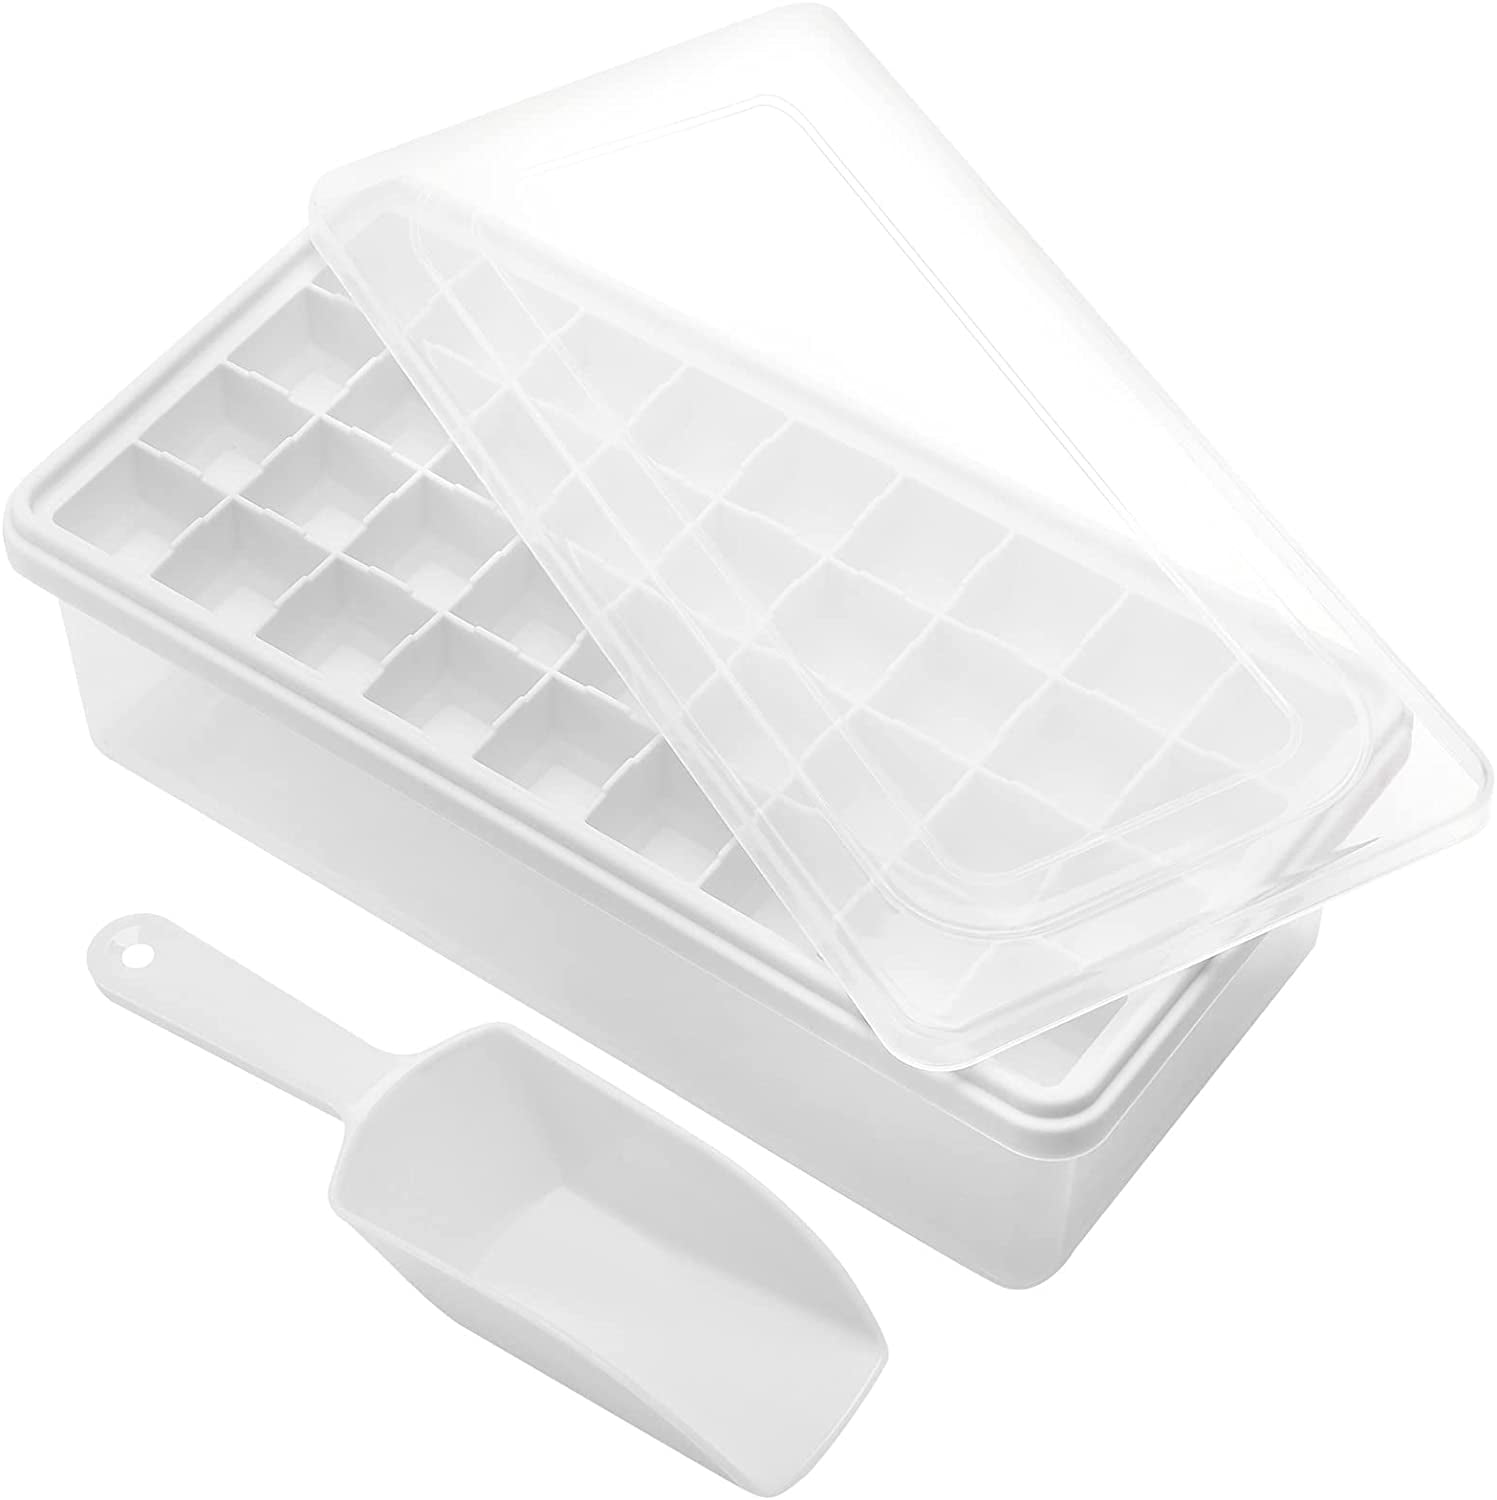 Updated Silicone Ice Cube Trays With Lid and Storage Bin, Easy-Release 2 *  32 Small Nugget Ice Tray with Spill-Proof Cover&Bucket,Ice Molds Maker for  Cocktails …